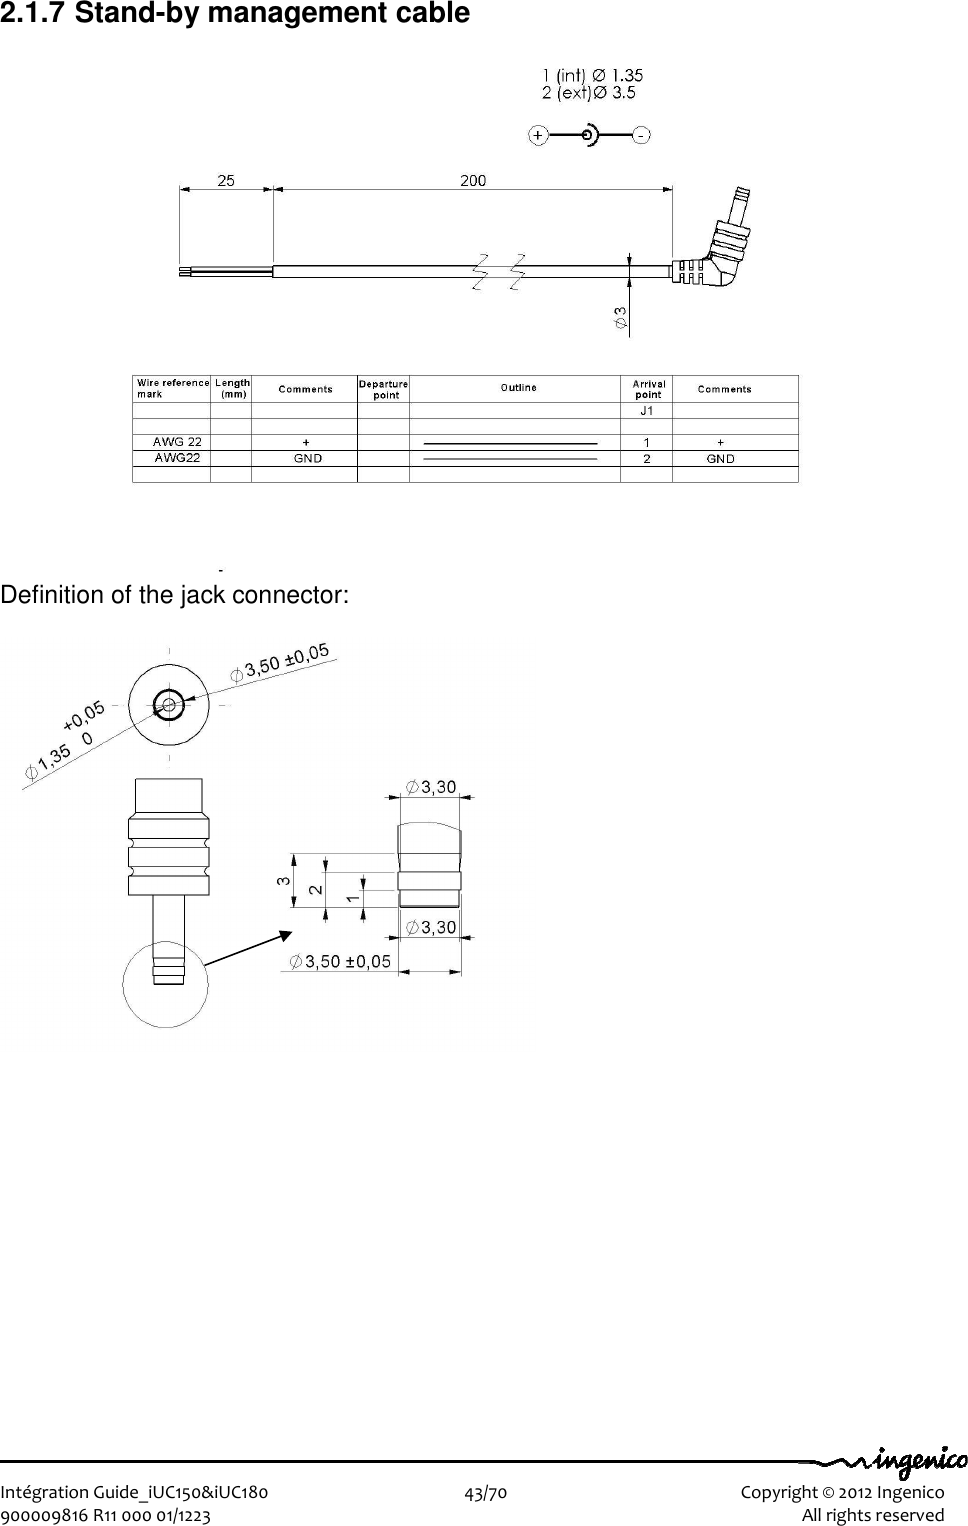   Intégration Guide_iUC150&amp;iUC180                        43/70    Copyright © 2012 Ingenico 900009816 R11 000 01/1223    All rights reserved 2.1.7 Stand-by management cable   Definition of the jack connector:  